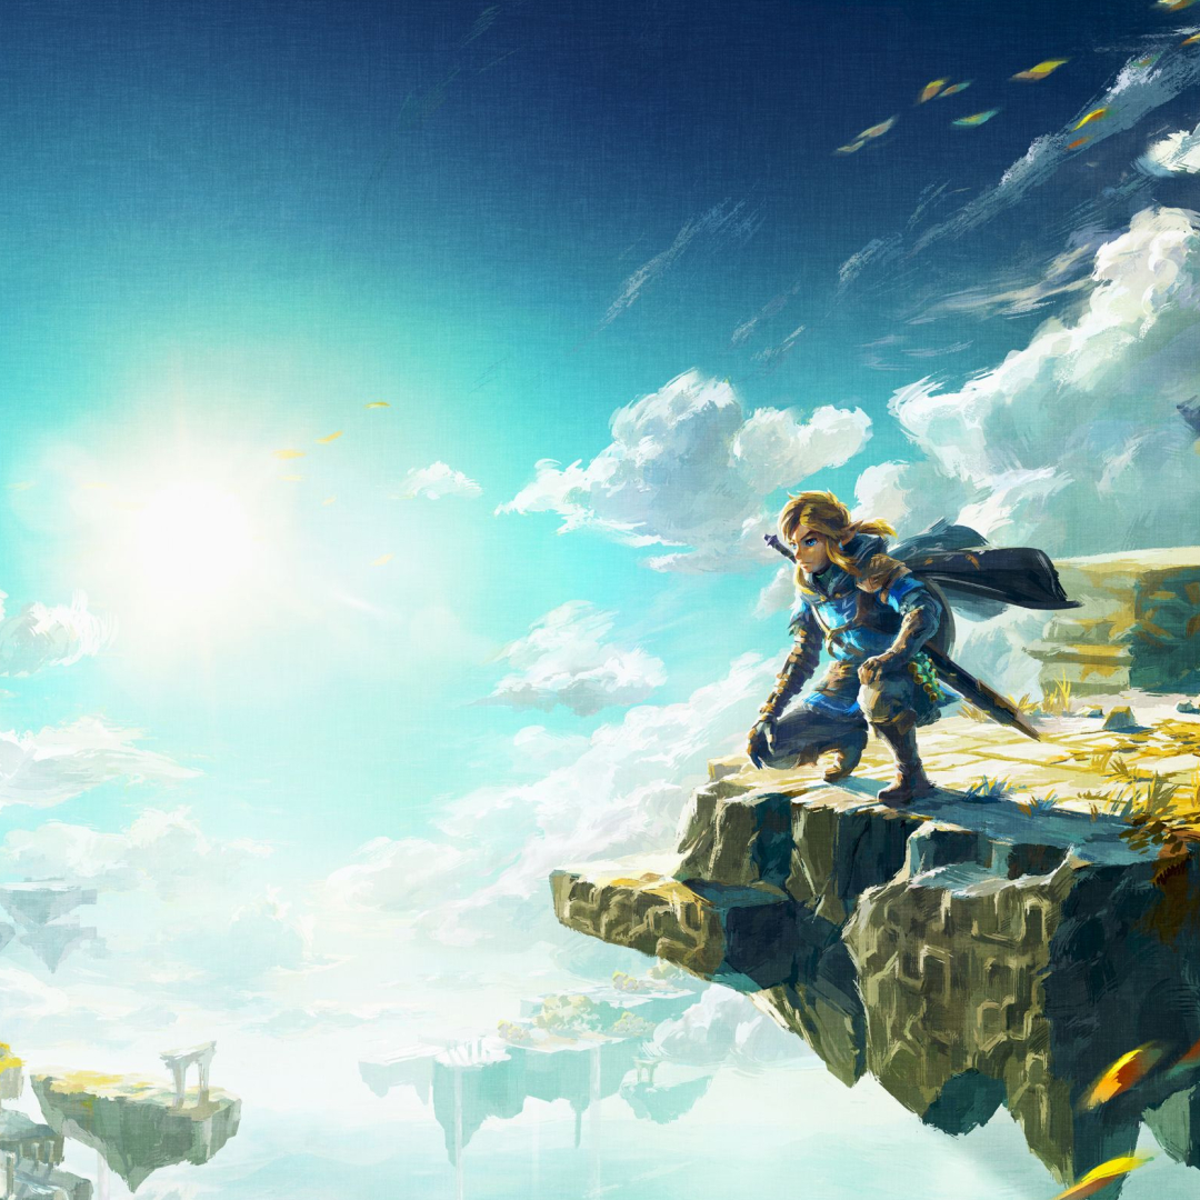 The Legend of Zelda: Tears of the Kingdom finally has a name and release date